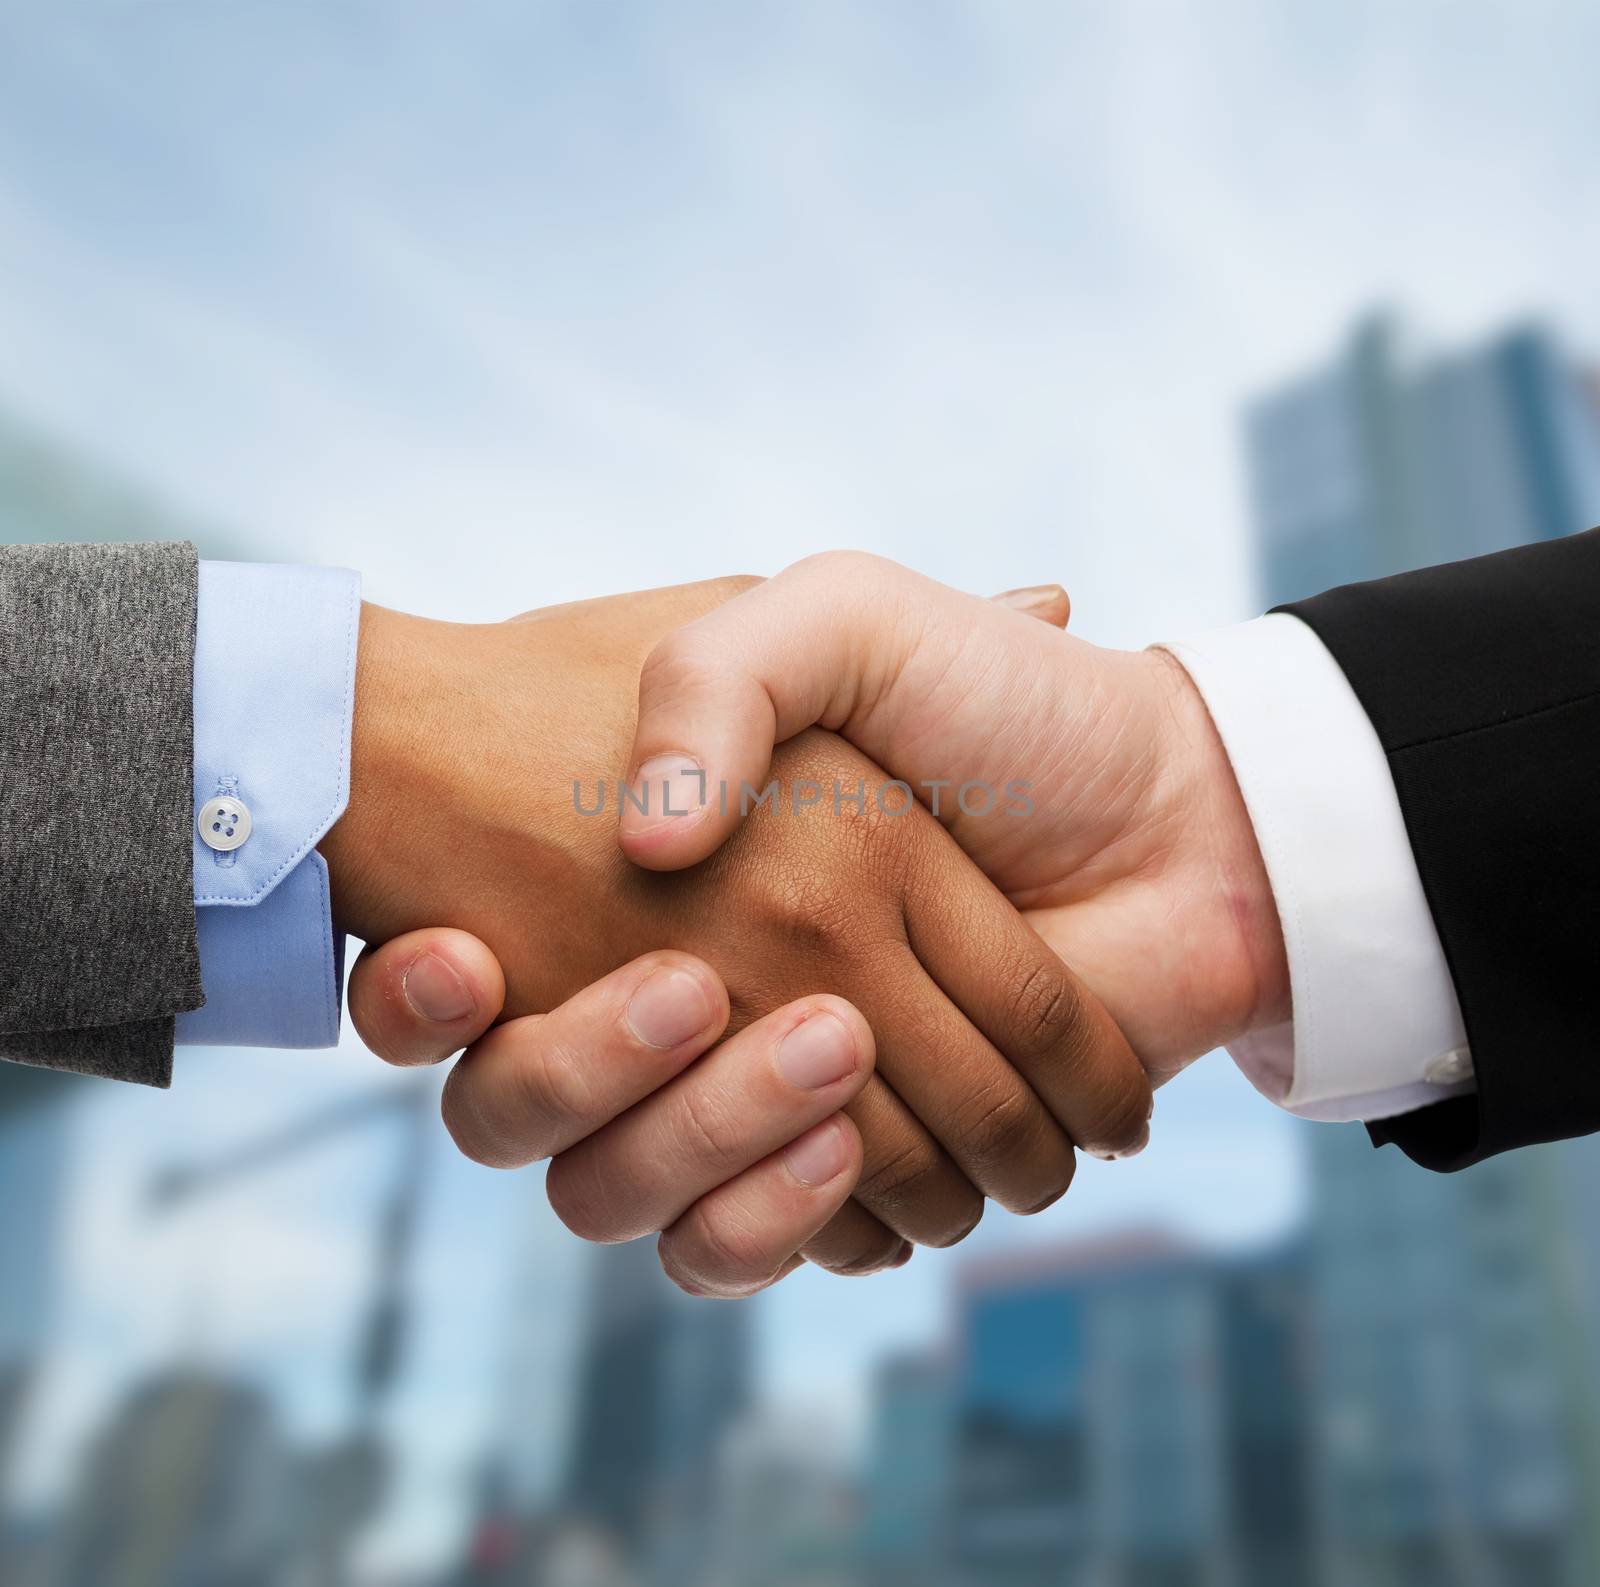 business and office concept - businessman and businesswoman shaking hands